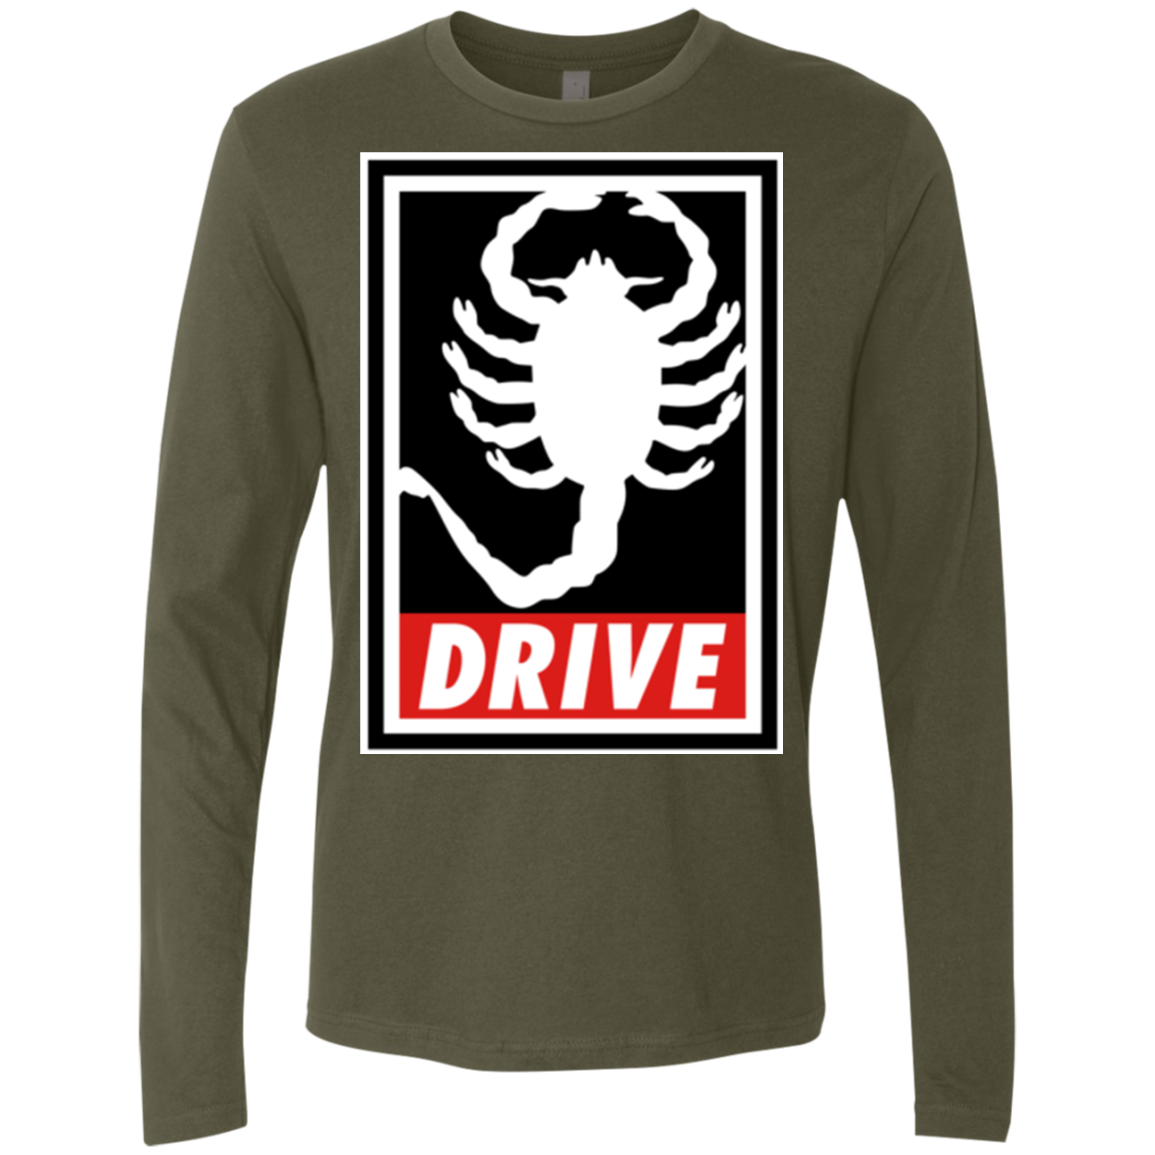 Obey and drive Men's Premium Long Sleeve